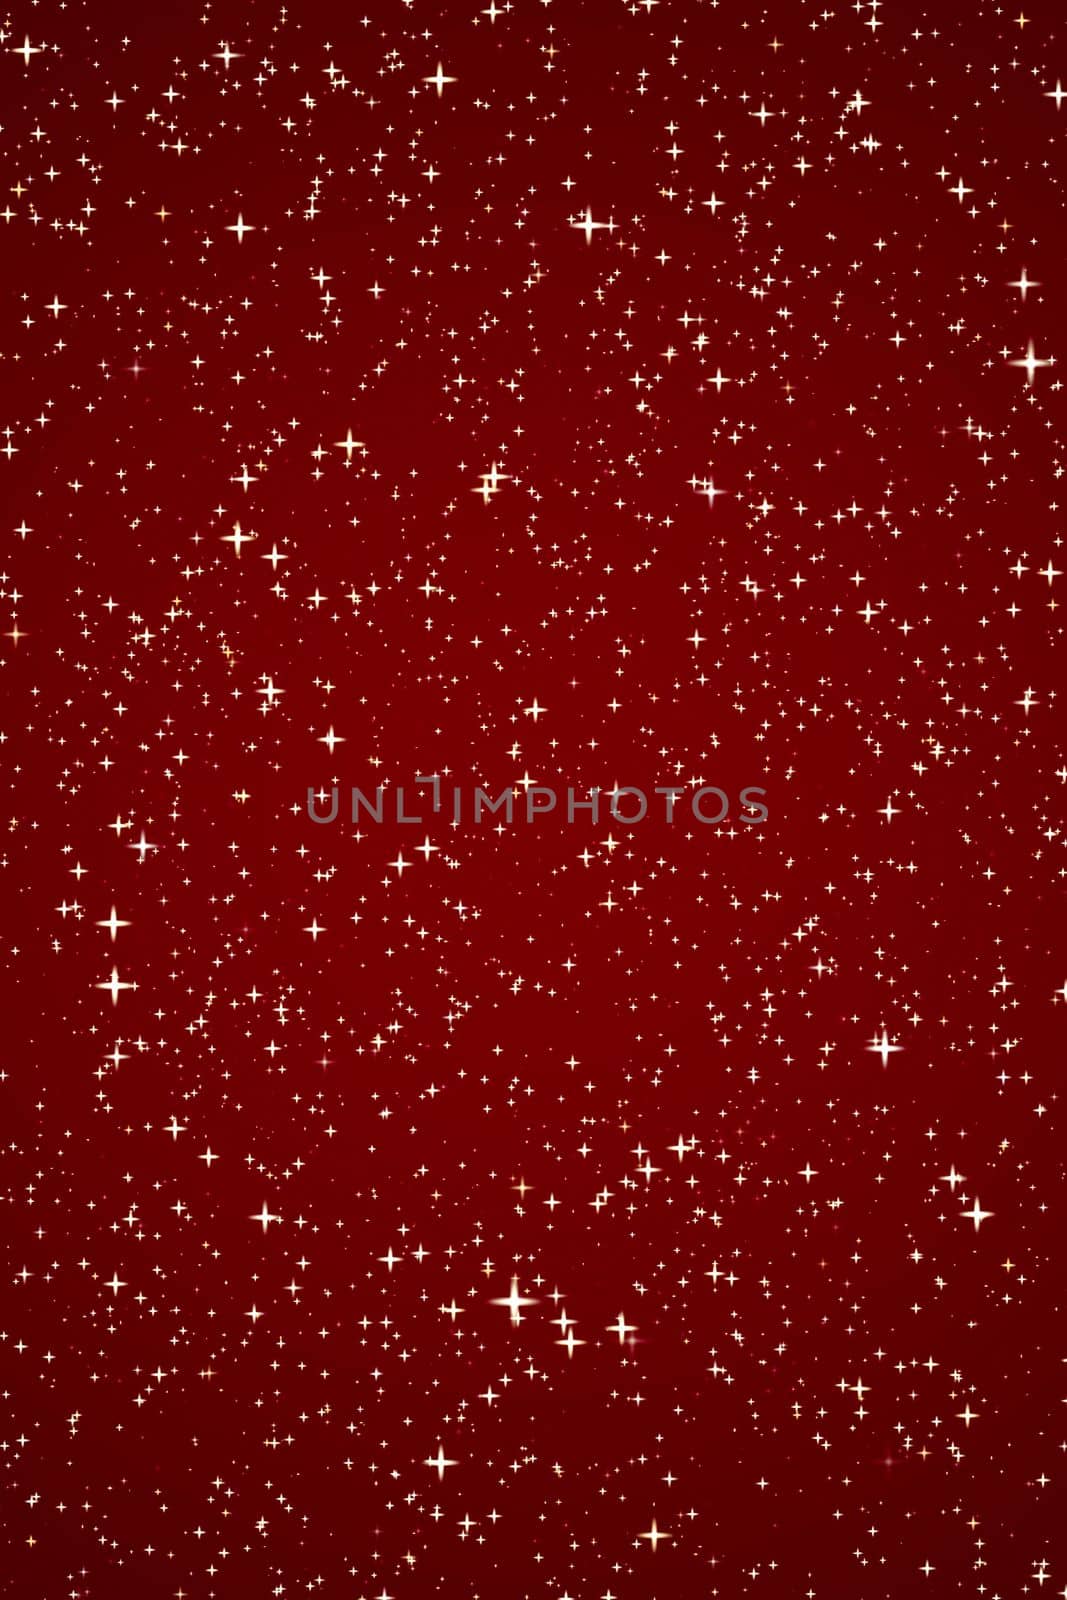 Luxury, magic and happy holidays background, golden sparkling glitter, gold stars and magical glow on festive red backdrop texture for Christmas, New Year and Valentines Day holiday design by Anneleven